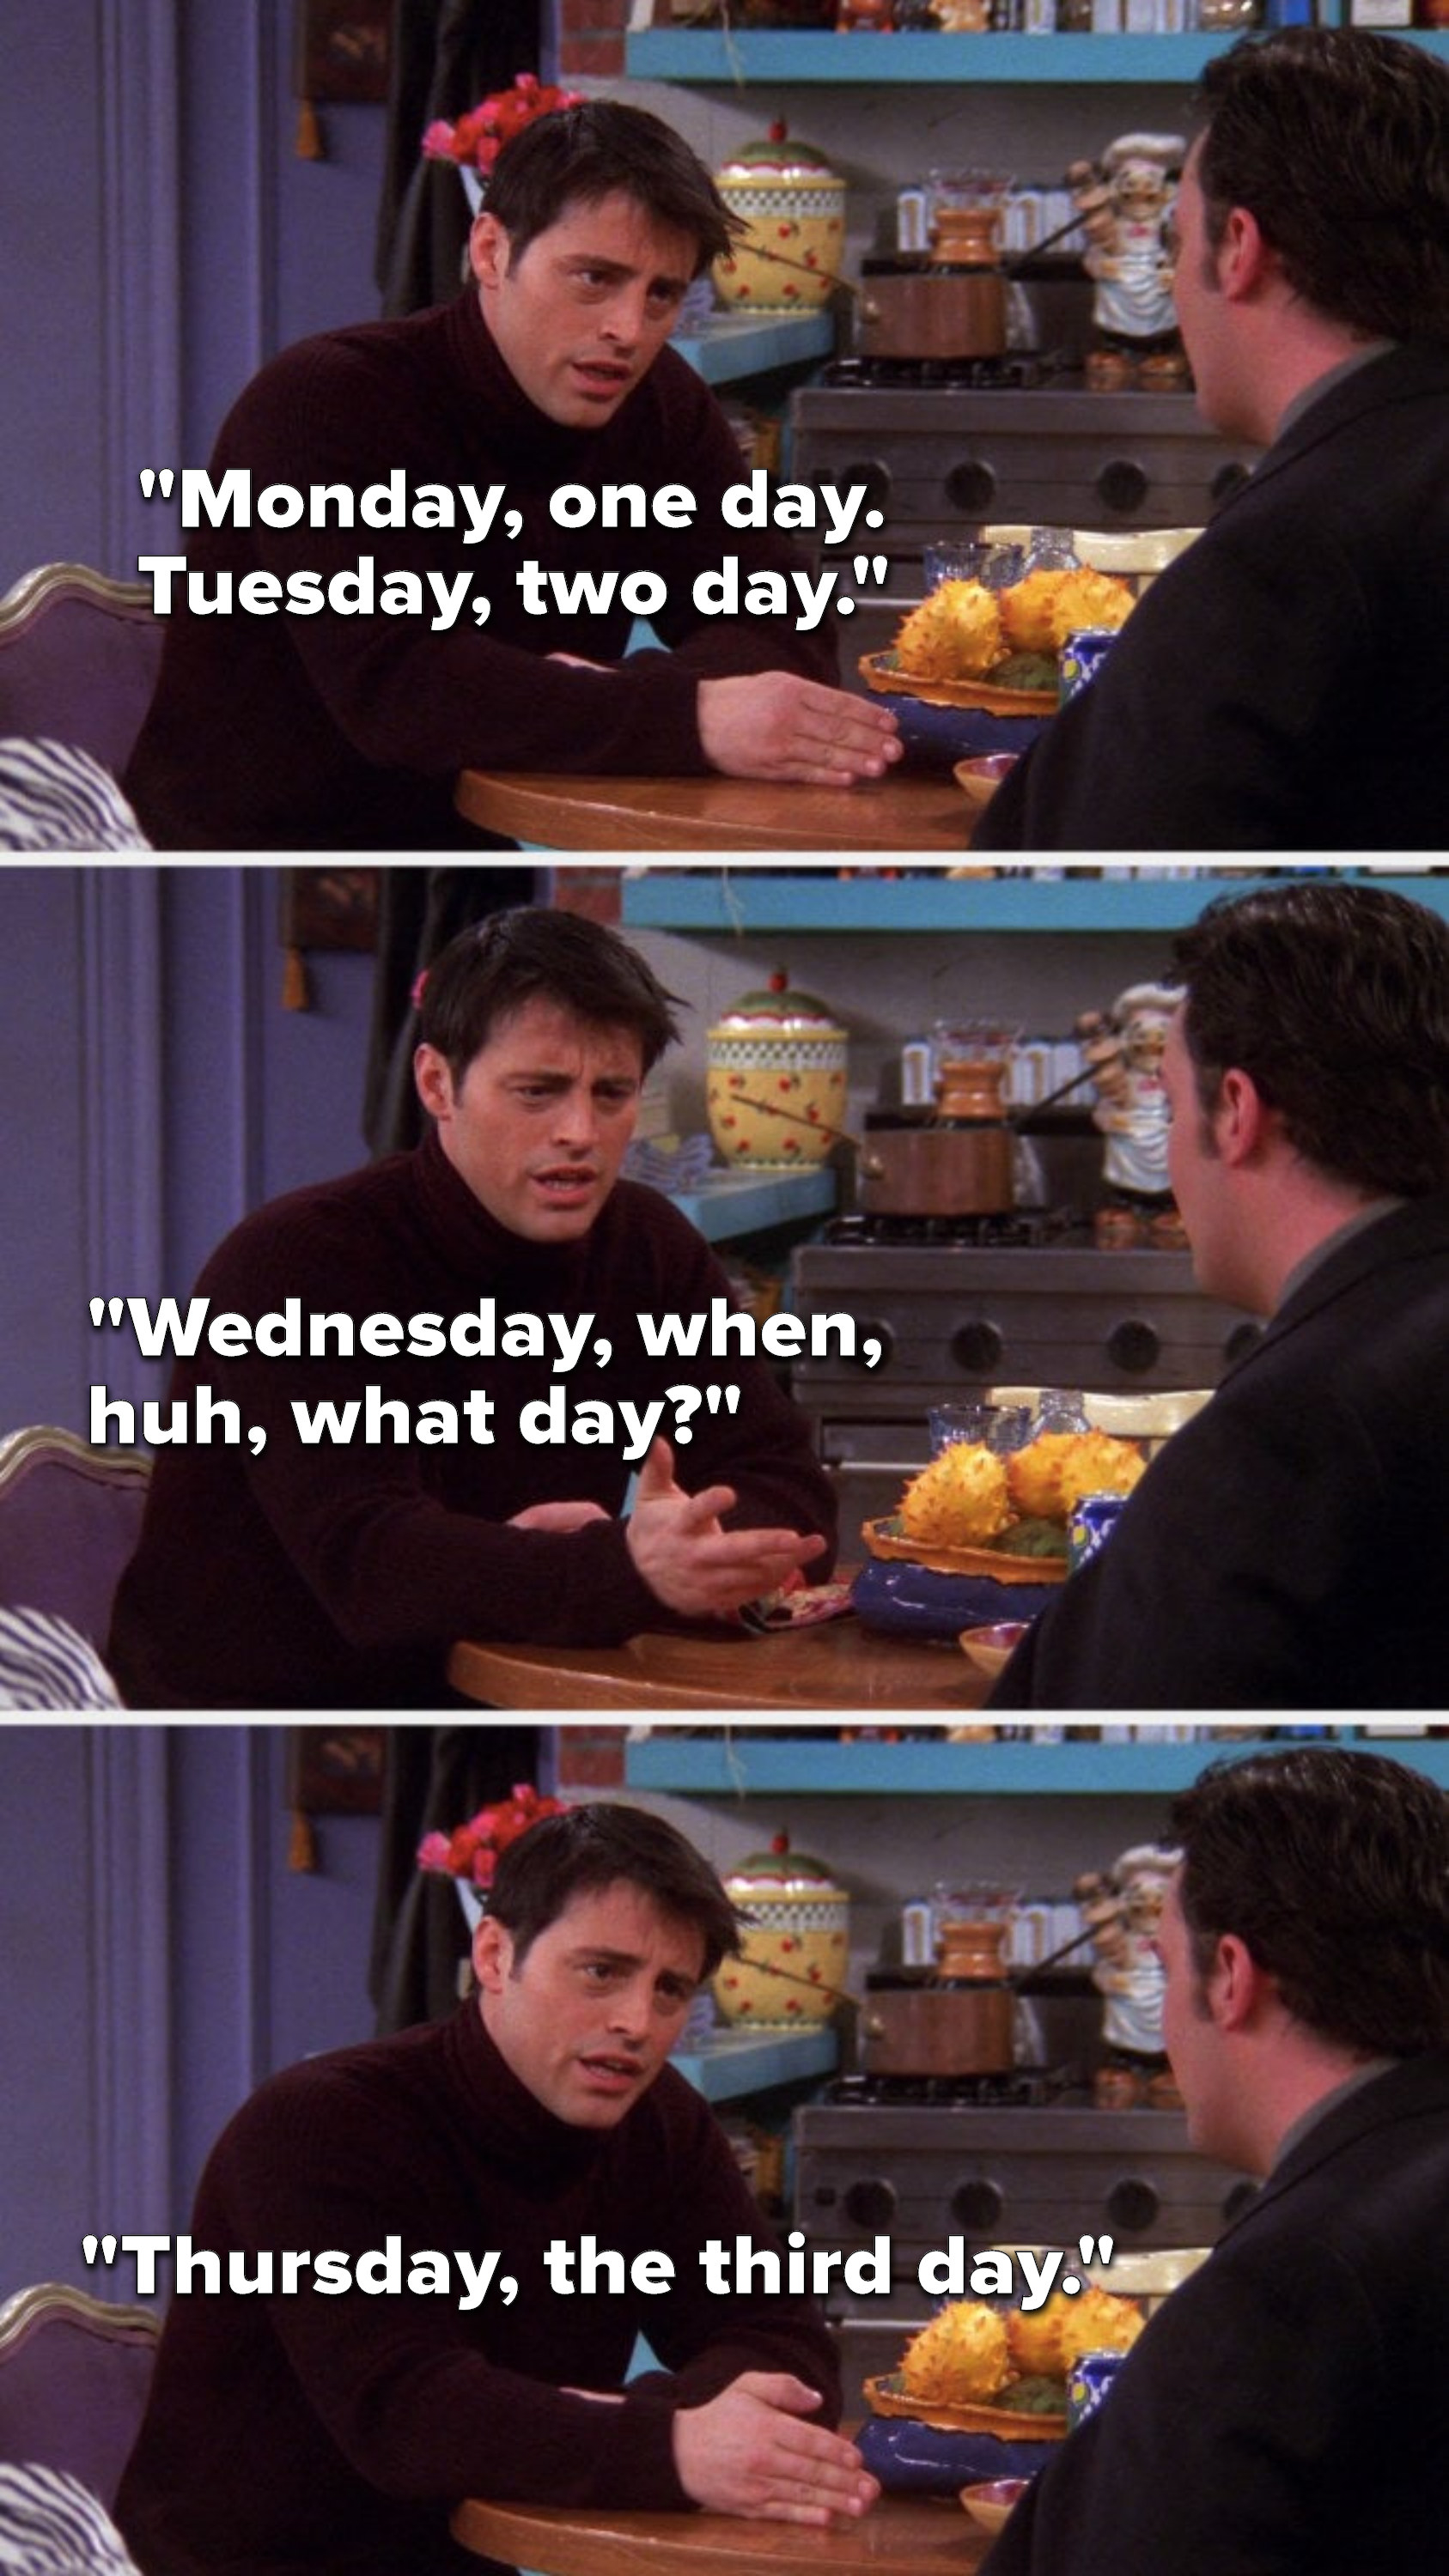 Joey says, &quot;Monday, one day, Tuesday, two day, Wednesday, when, huh what day, Thursday, the third day&quot;